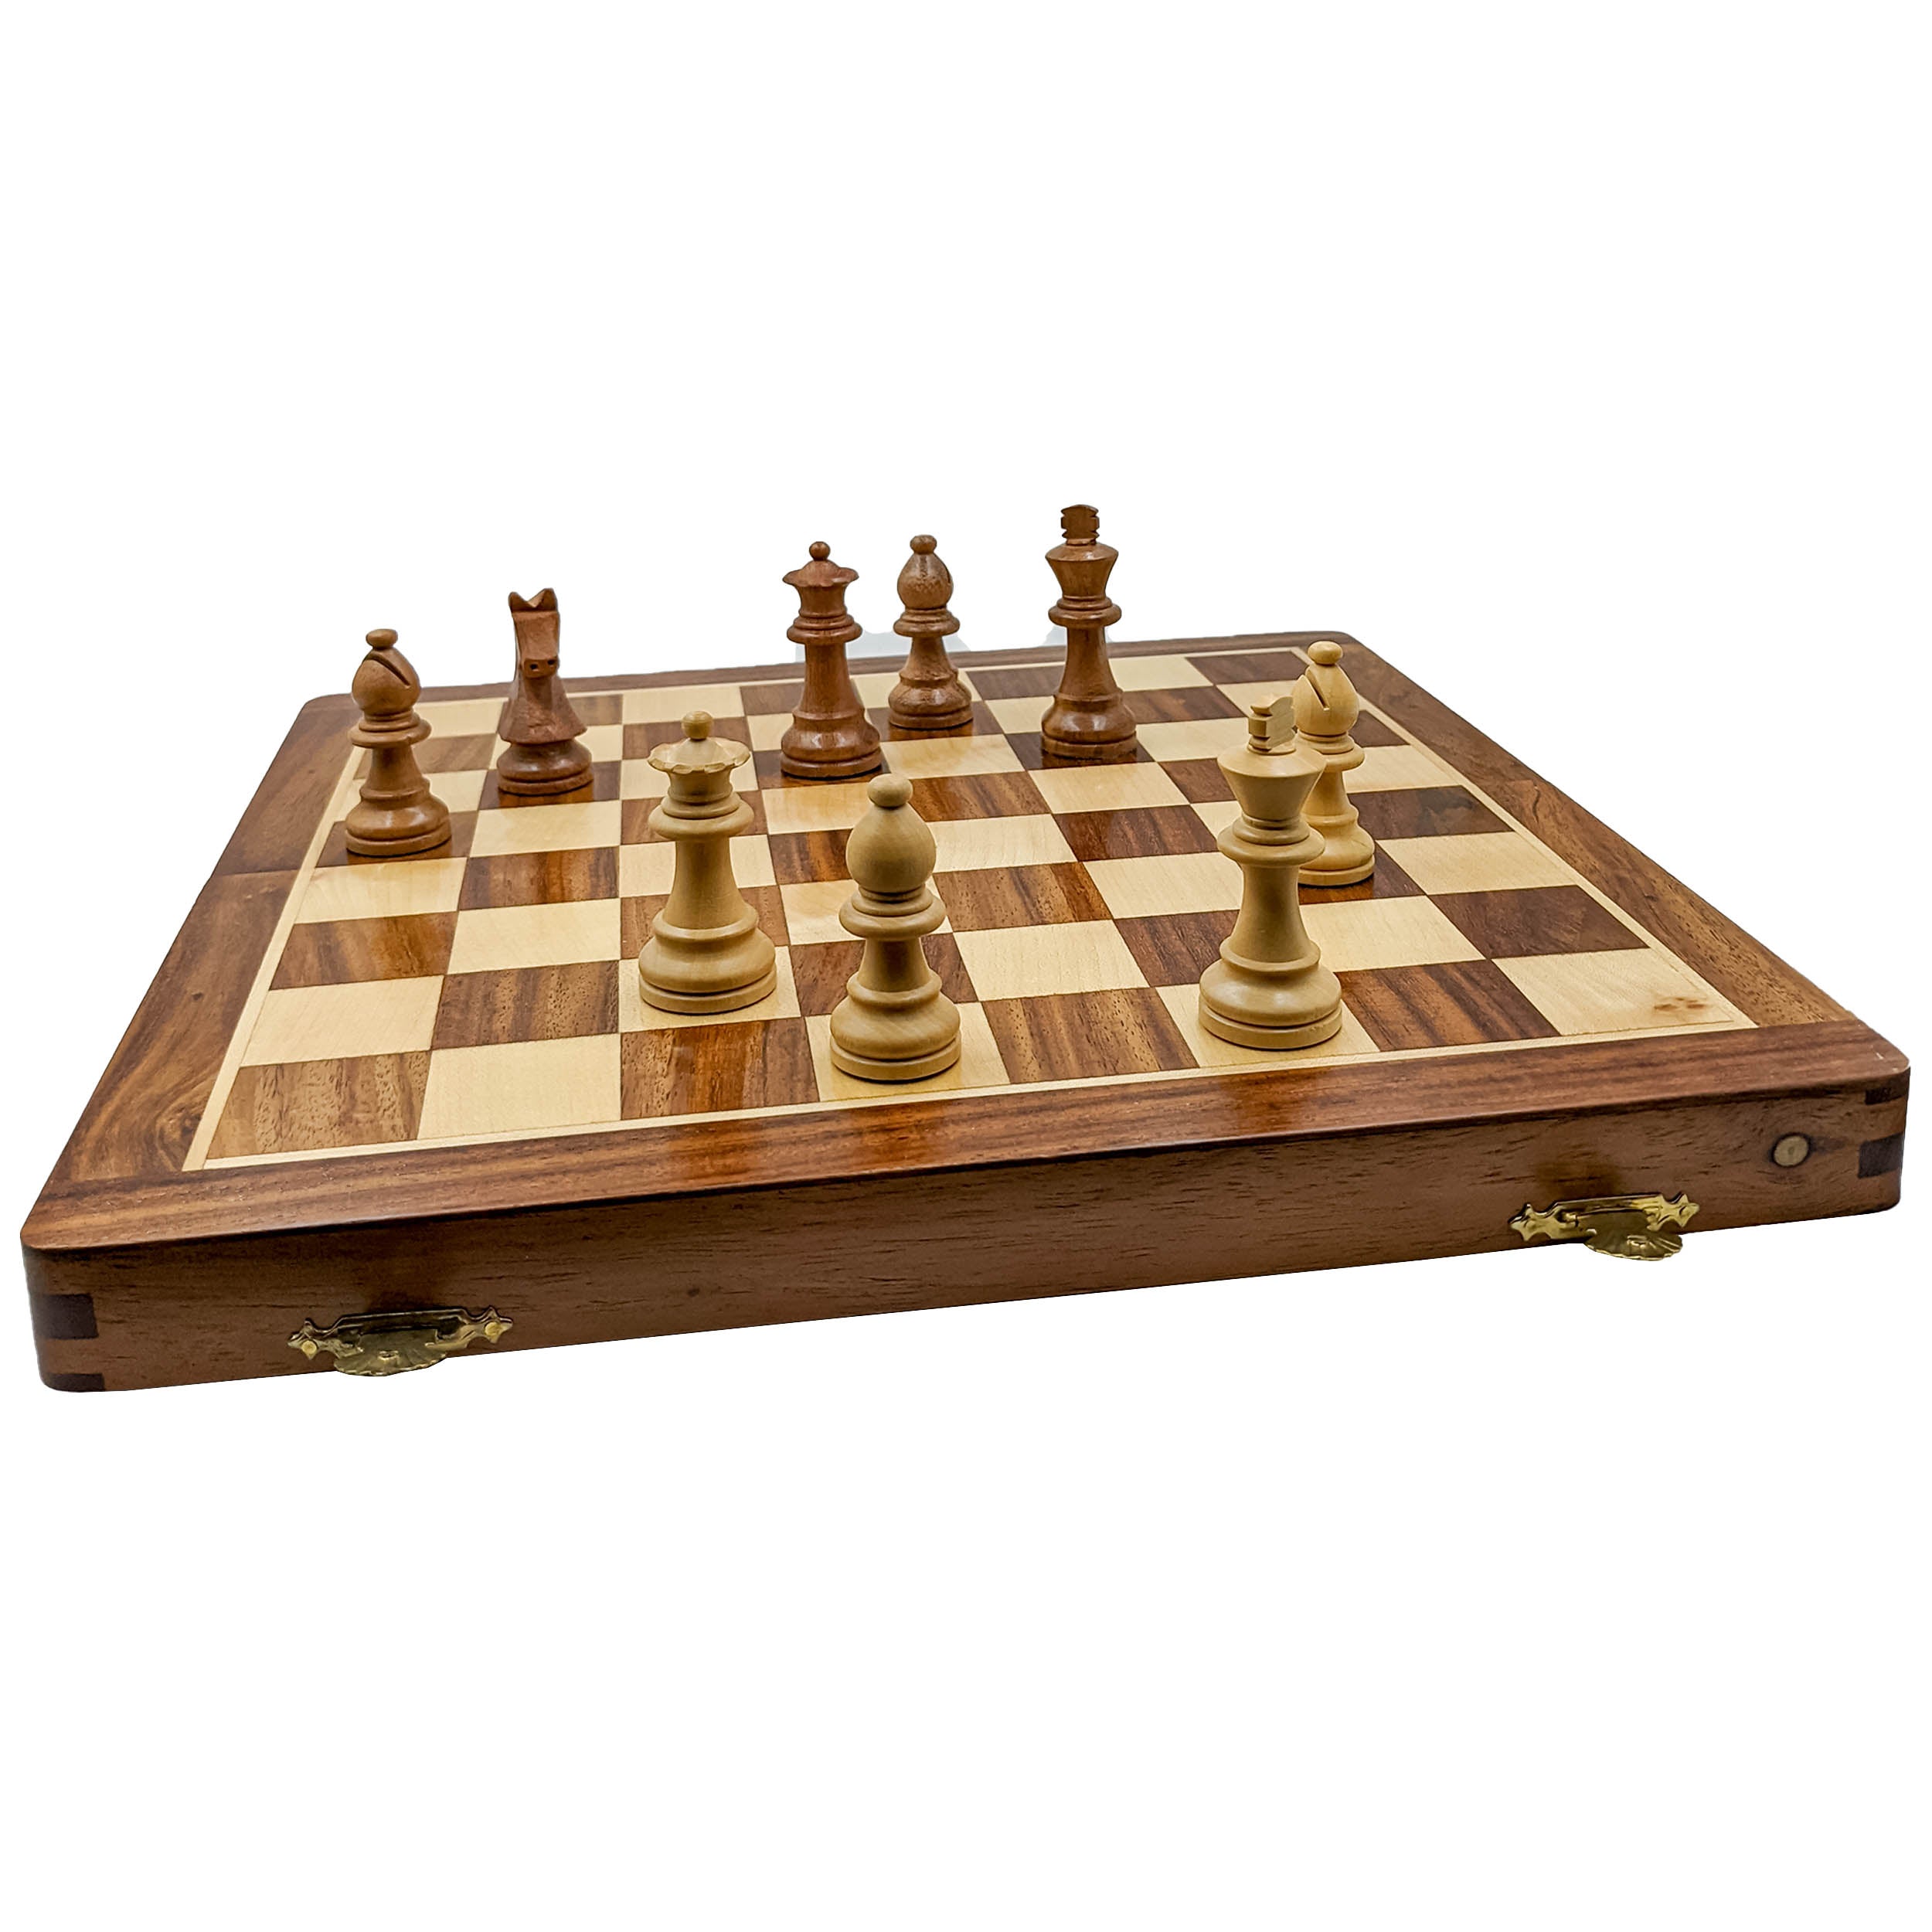 Handmade Folding Wooden Chess Board - Exquisite Design and Superior Quality